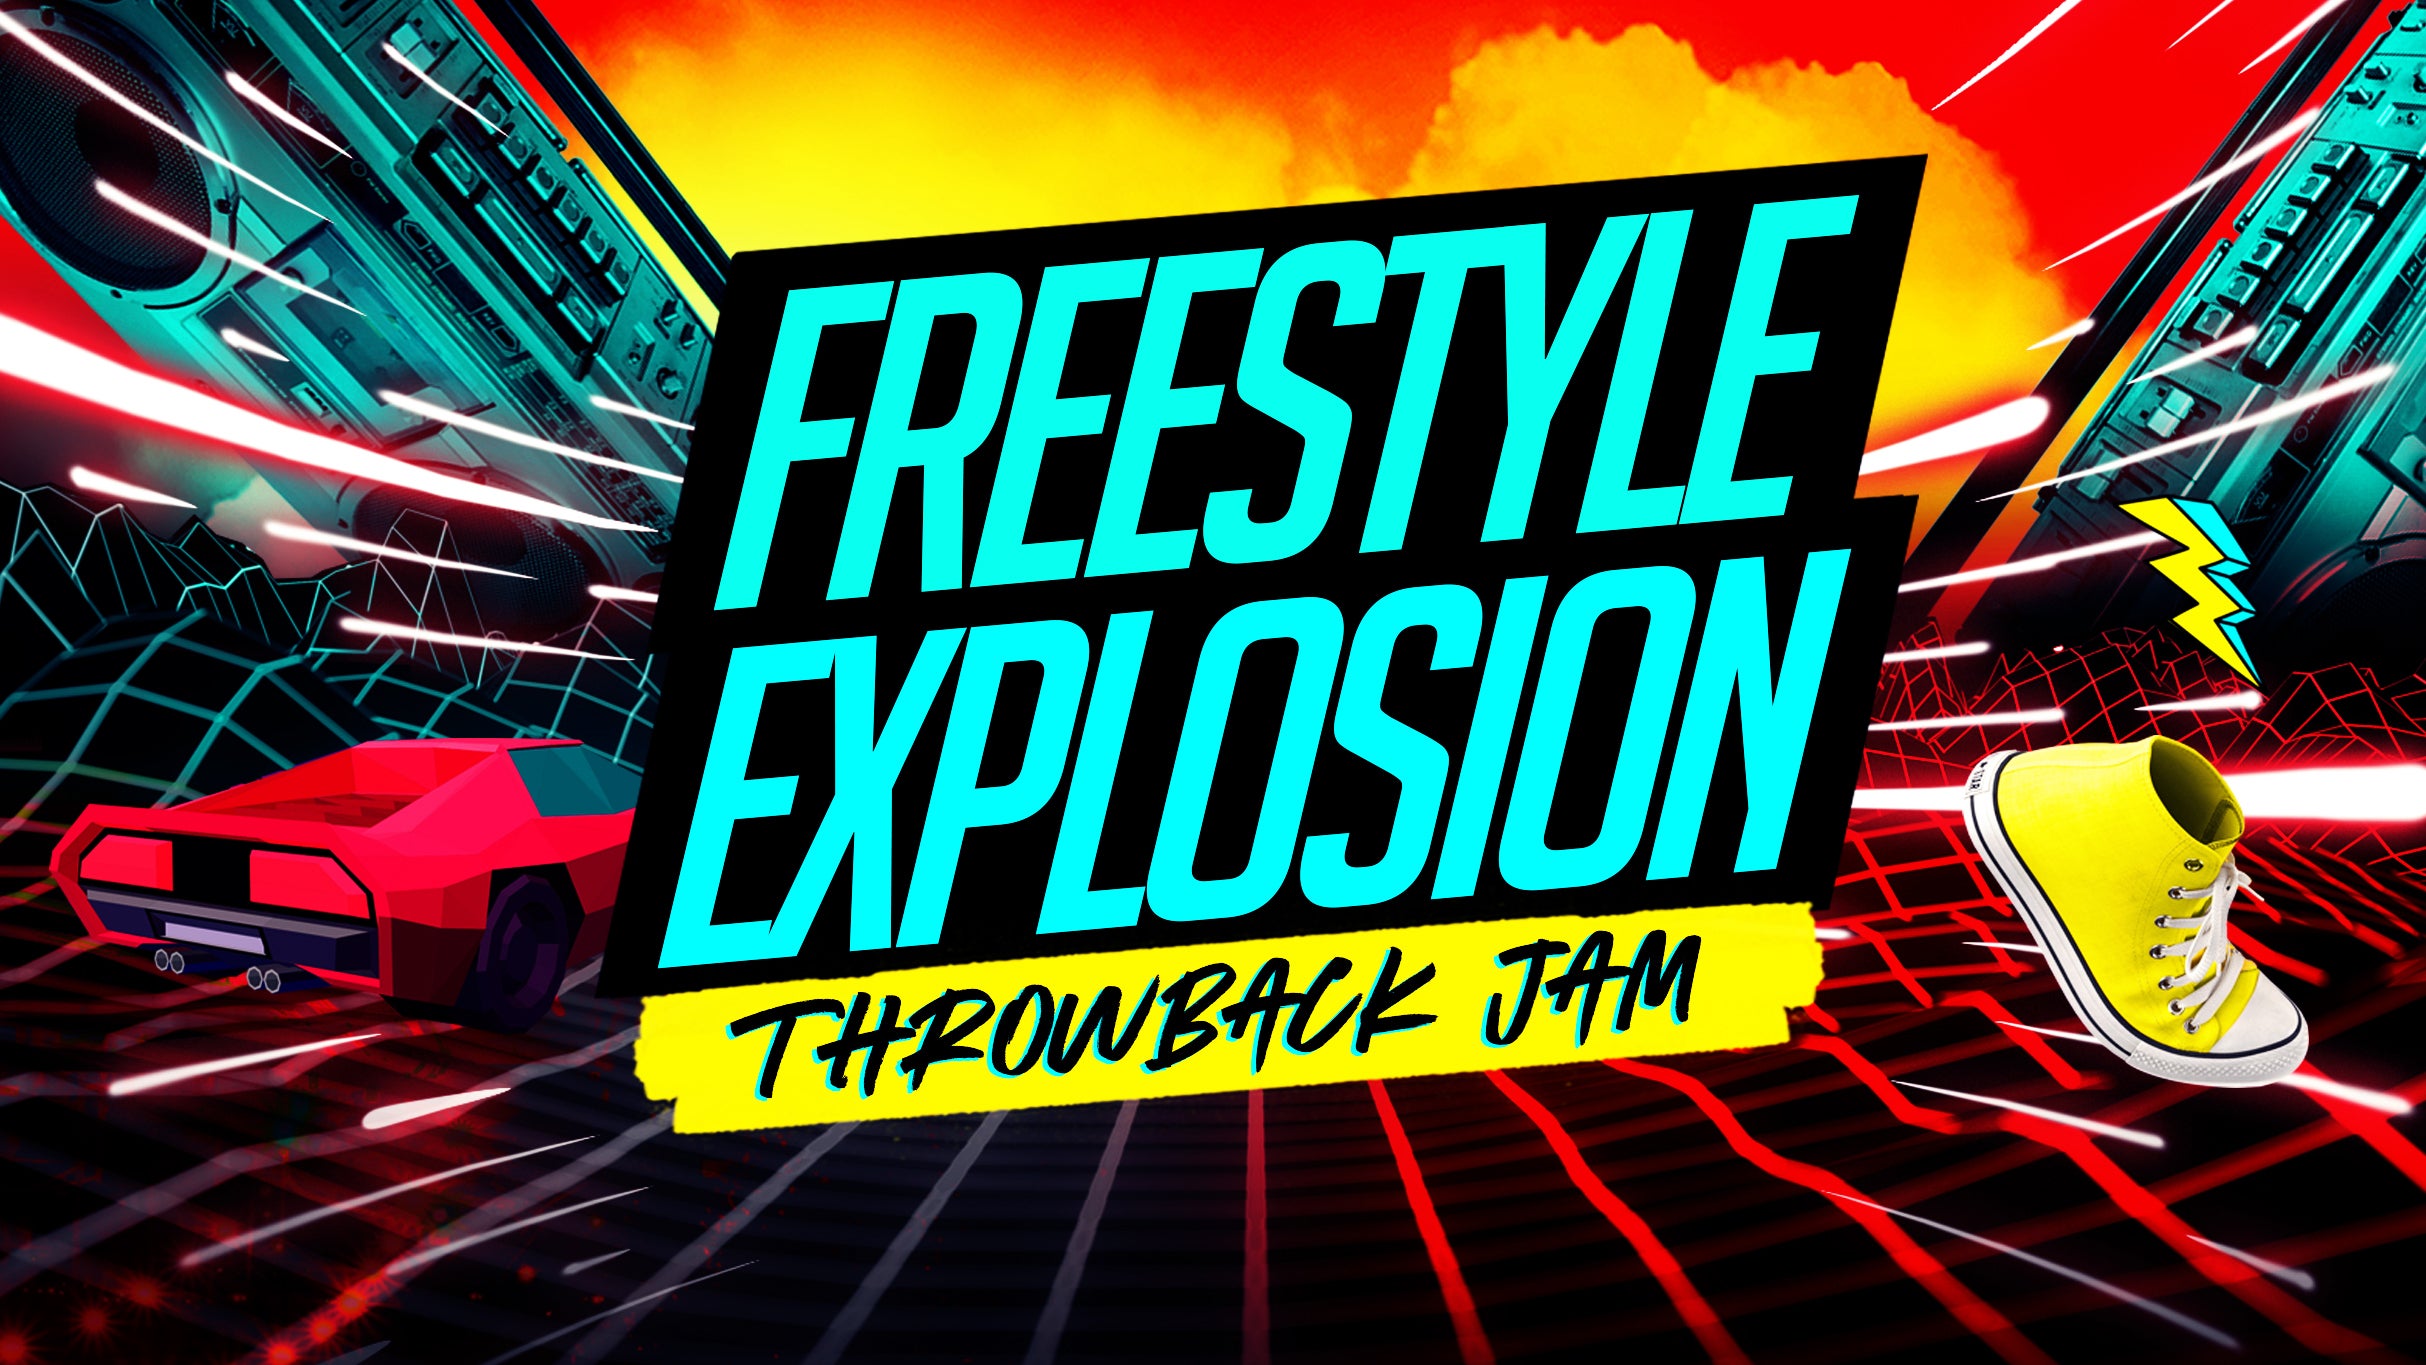 working presale code to Freestyle Explosion Throwback Jam advanced tickets in Inglewood at YouTube Theater